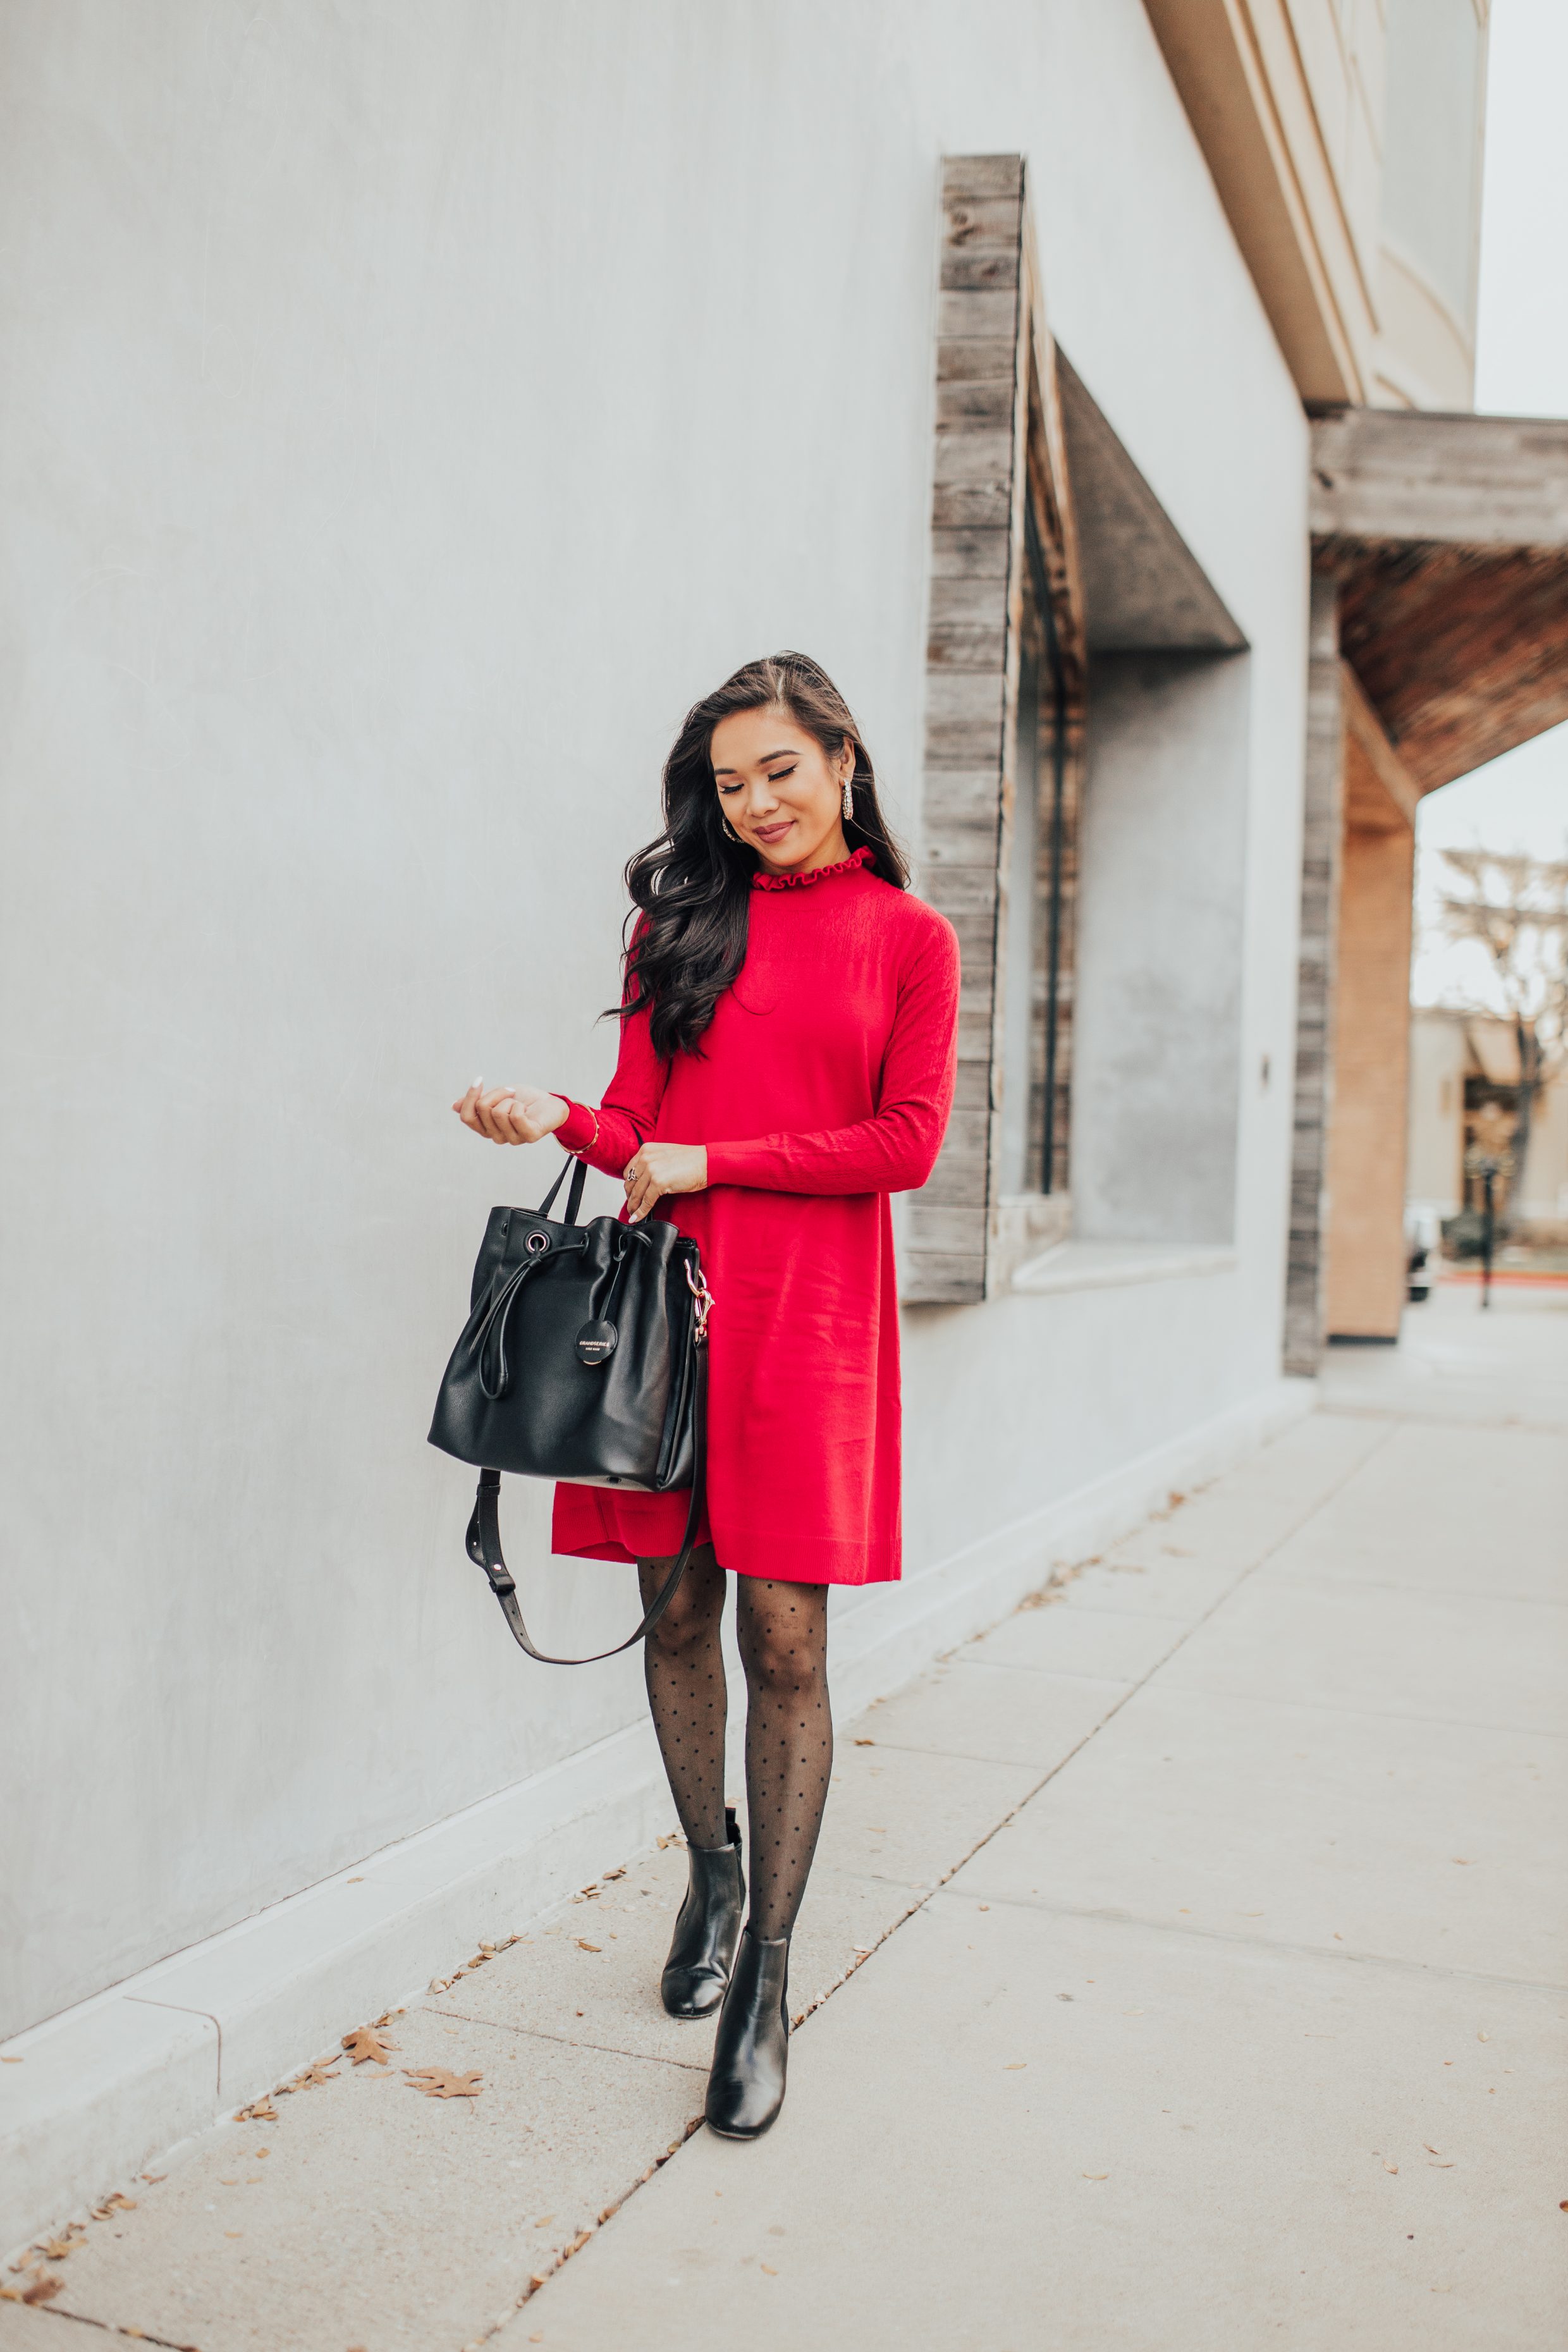 holiday outfit ideas with a red sweater dress, polka dot tights, bucket bag and hoop earrings